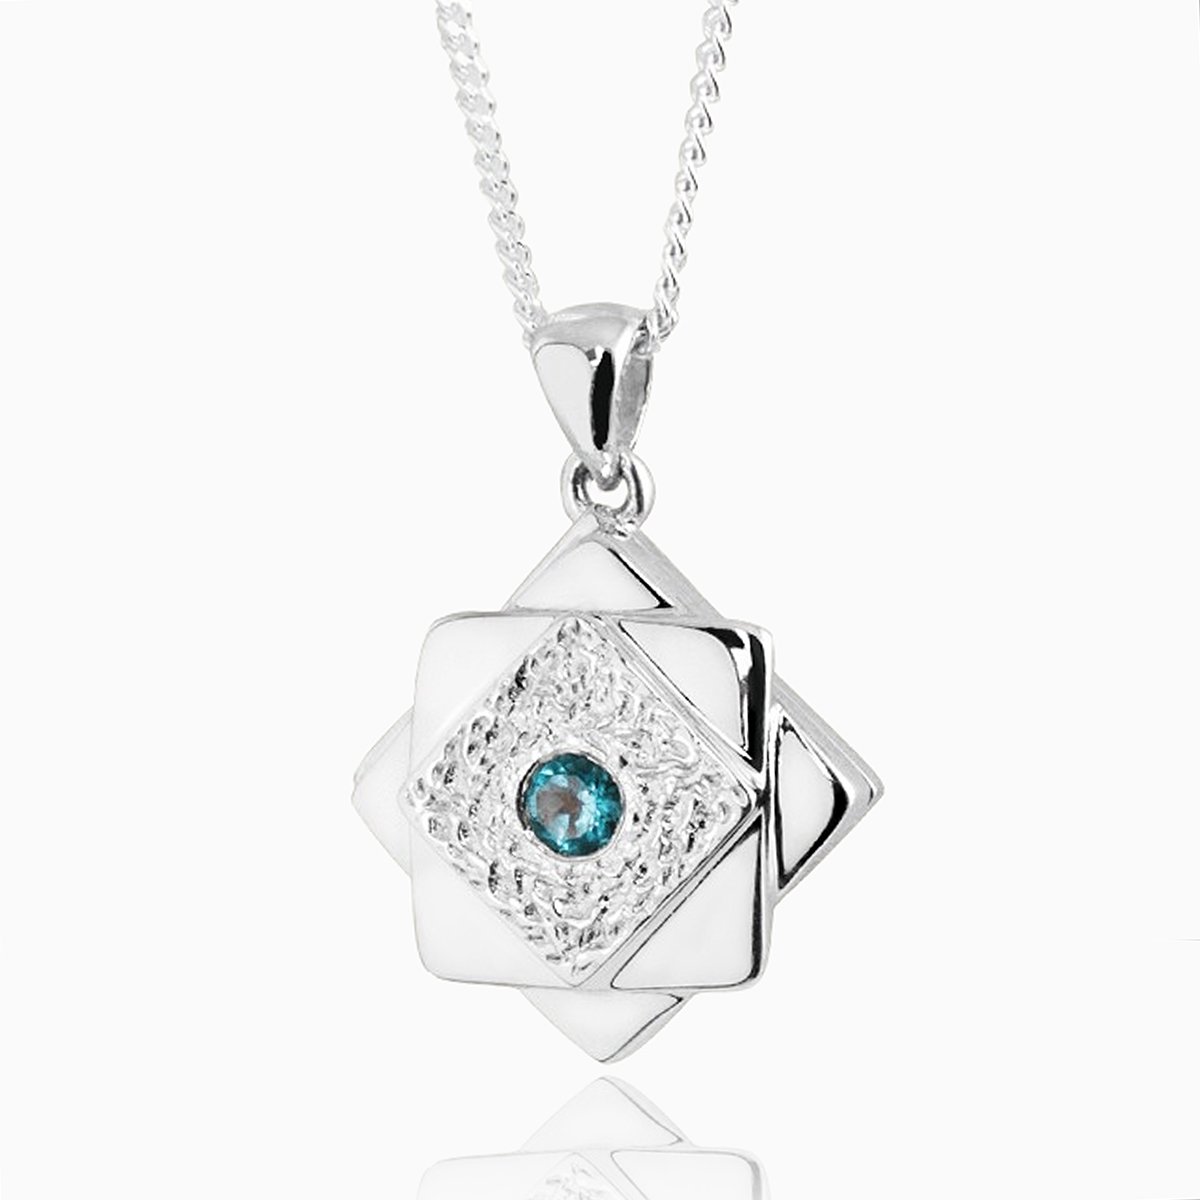 Product title: Contemporary Topaz Star Locket, product type: Locket